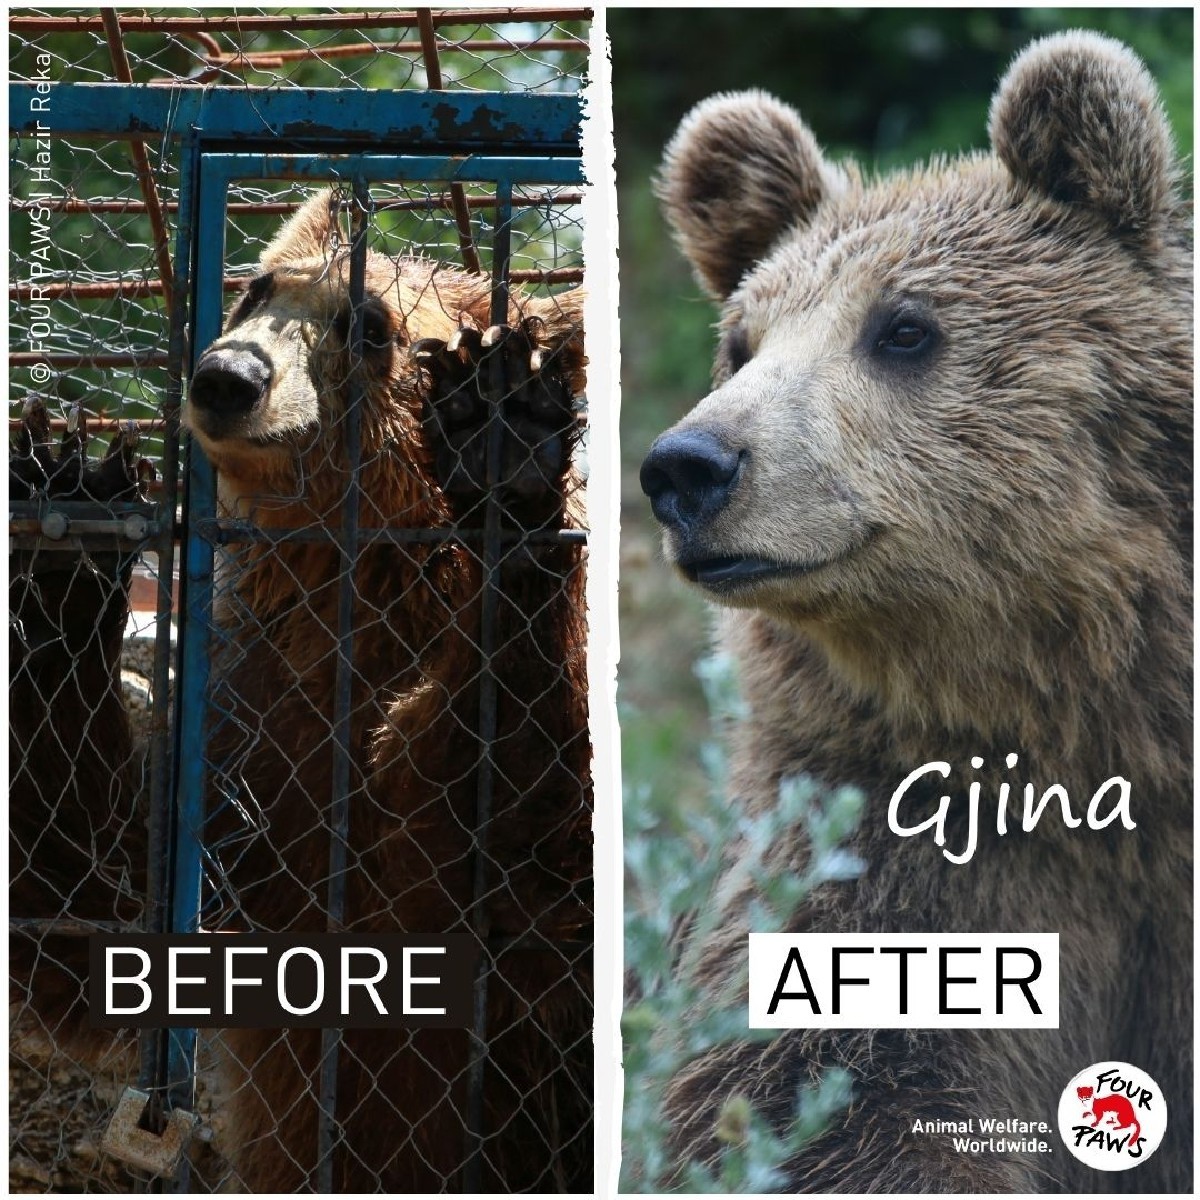 Bear Gjina 🐻💚

💔Kept in a tiny cage in Albania, underweight
🍺Forced to drink up to 20 beers a day
🚚We rescued her in 2016
📍BEAR SANCTUARY Prishtina
💜Inseparable from bear Pashuk
📖Learn more about our work #savethesaddestbears ➡️fpau.org/rescuebears-tv

#bear #bearrescue